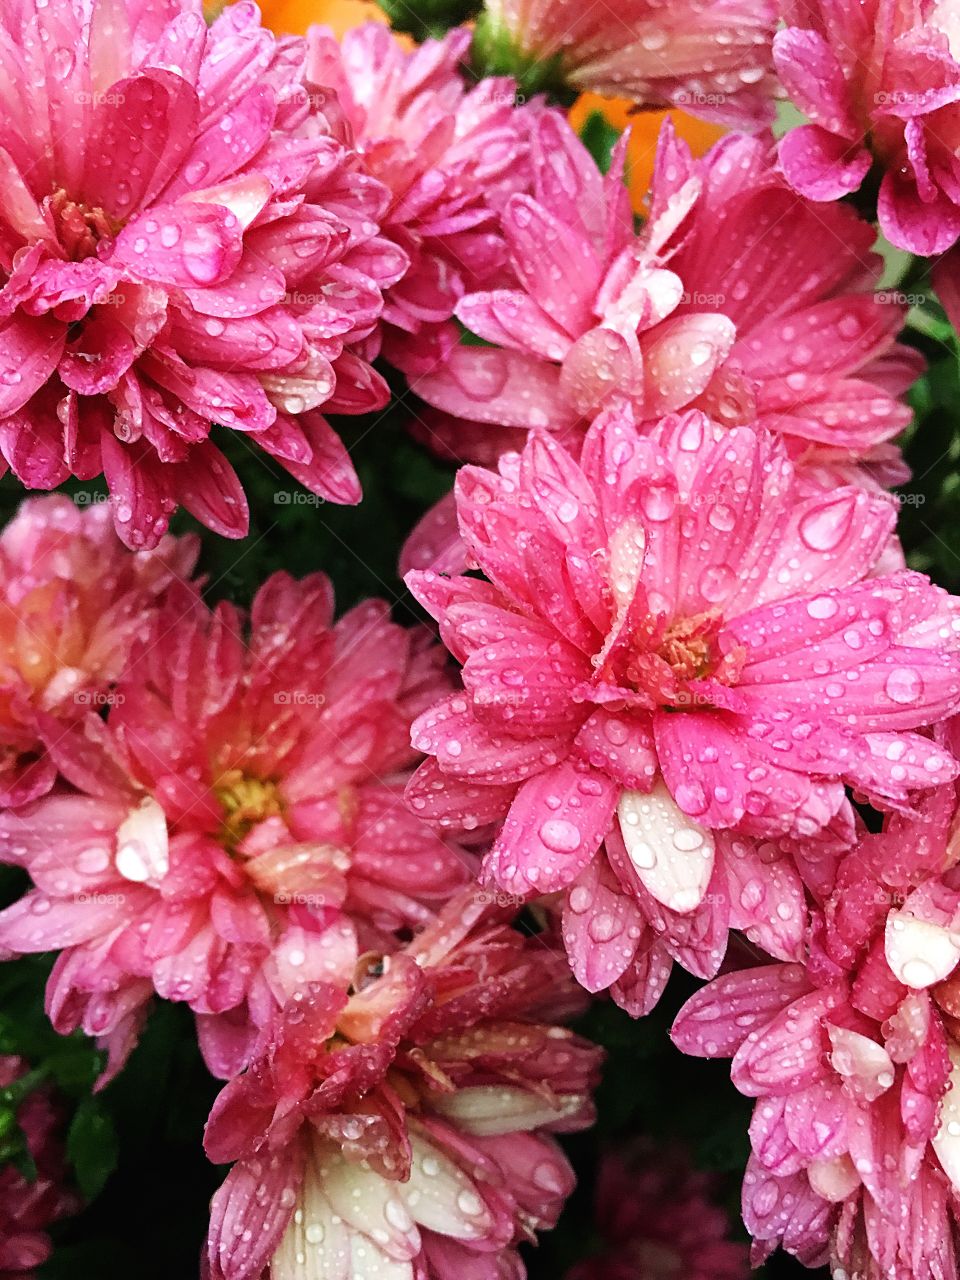 Bright pink floral mums after a fresh rainfall.